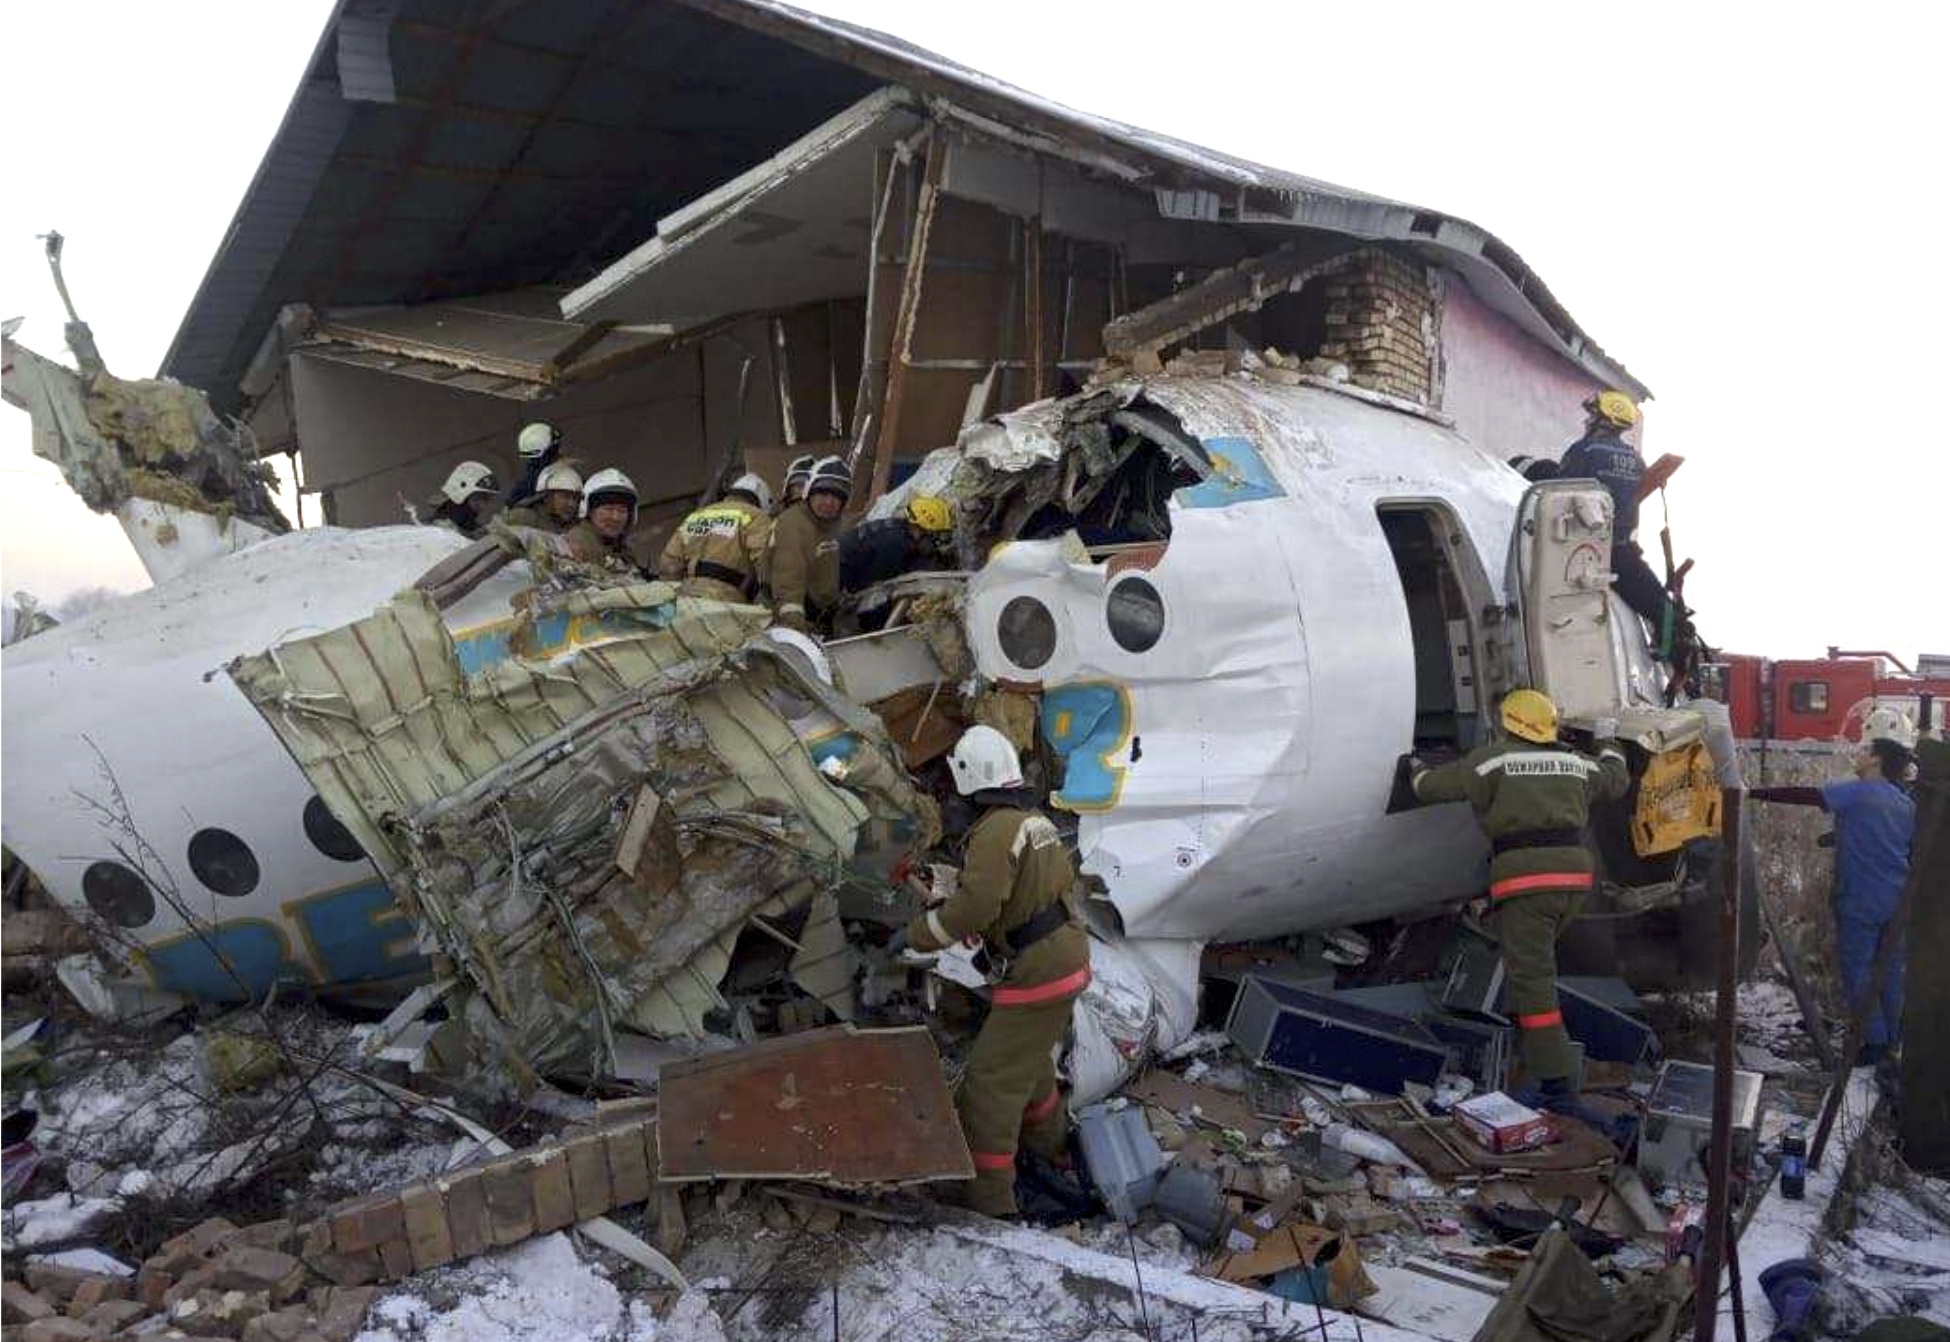 PHOTO: In this handout photo provided by the Emergency Situations Ministry of the Republic of Kazakhstan, police and rescuers work on the side of a plane crash near Almaty International Airport, outside Almaty, Kazakhstan, Friday, Dec. 27, 2019. 